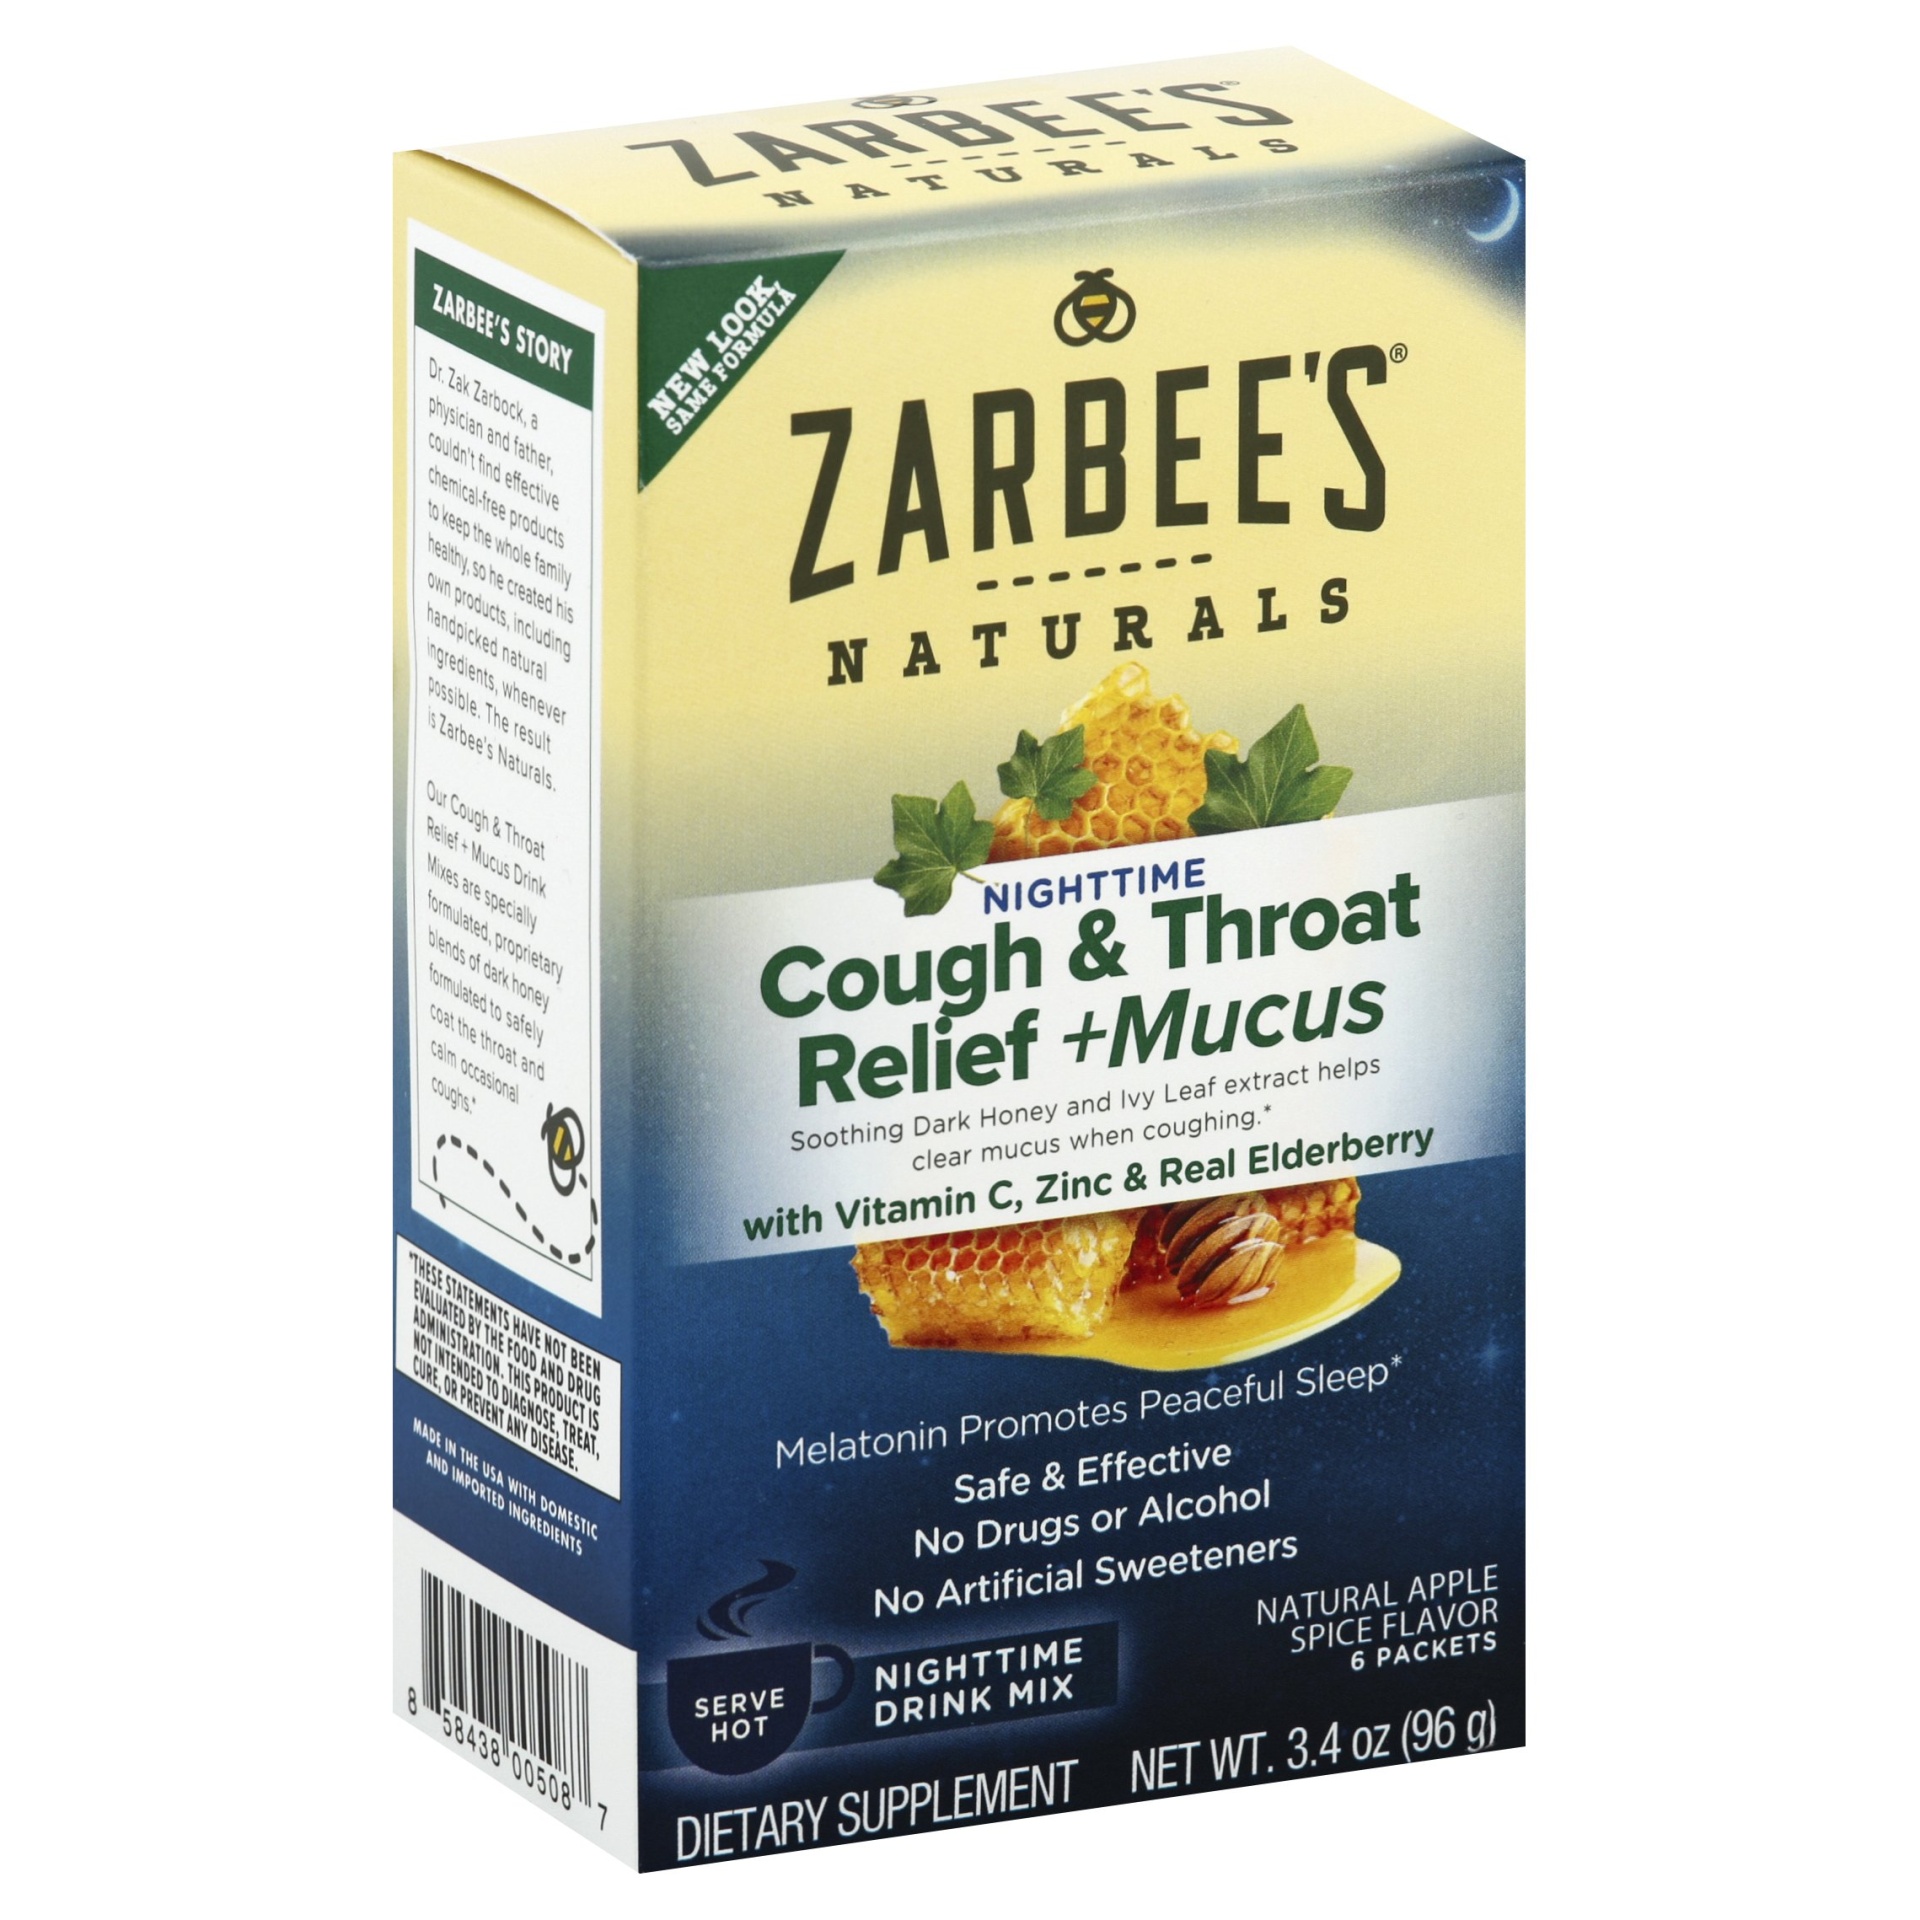 slide 1 of 6, Zarbee's Naturals Apple Spice Cough & Throat Relief + Mucus Nighttime Drink Mix, 3.4 oz